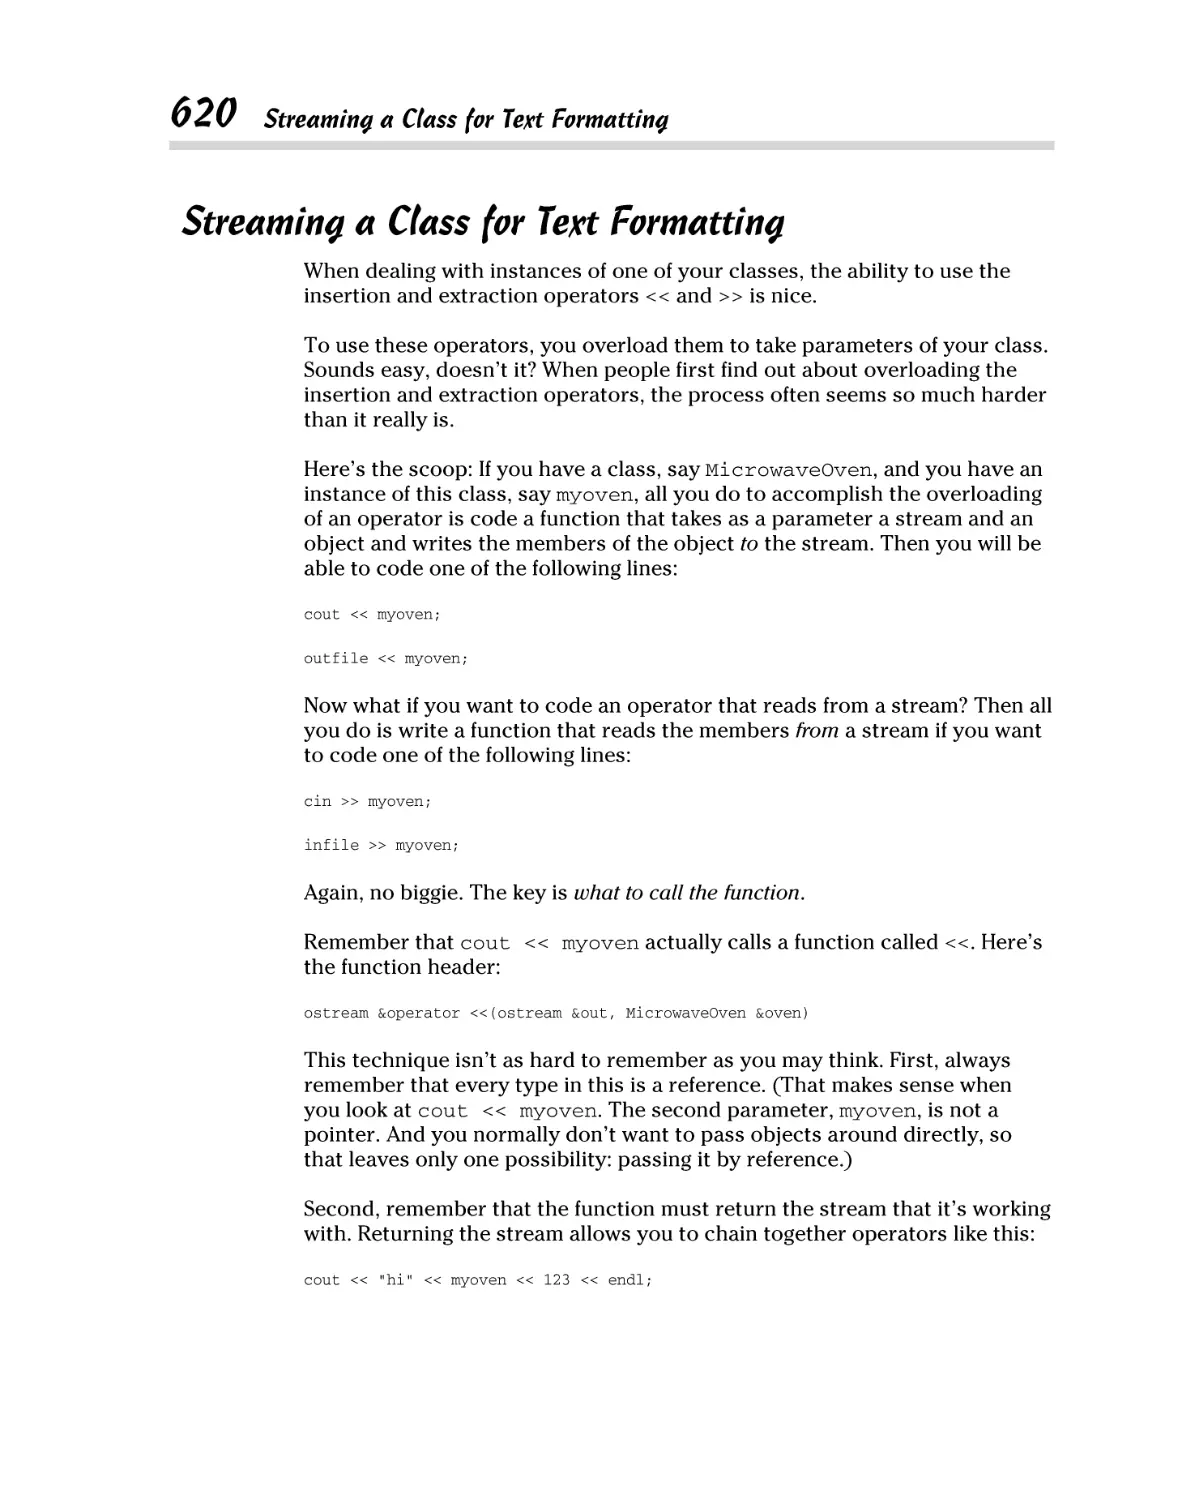 Streaming a Class for Text Formatting